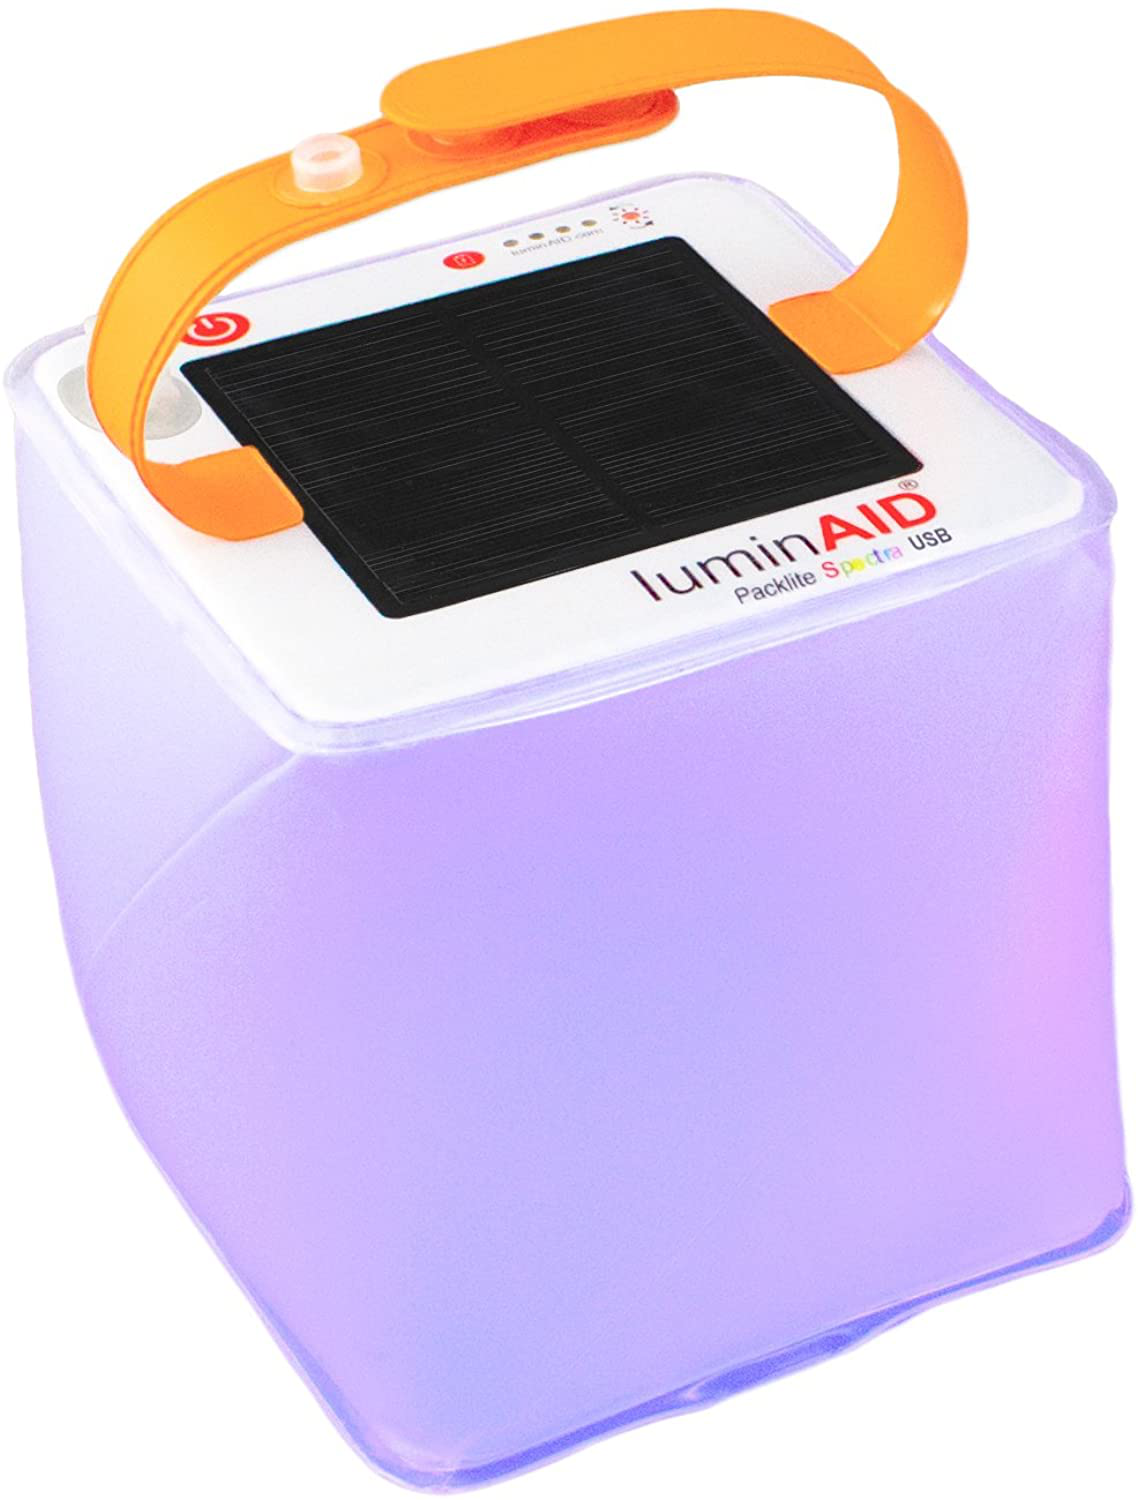 Luminaid Solar Inflatable Lanterns | Great for Camping, Hurricane Emergency Kits and Travel | as Seen on Shark Tank